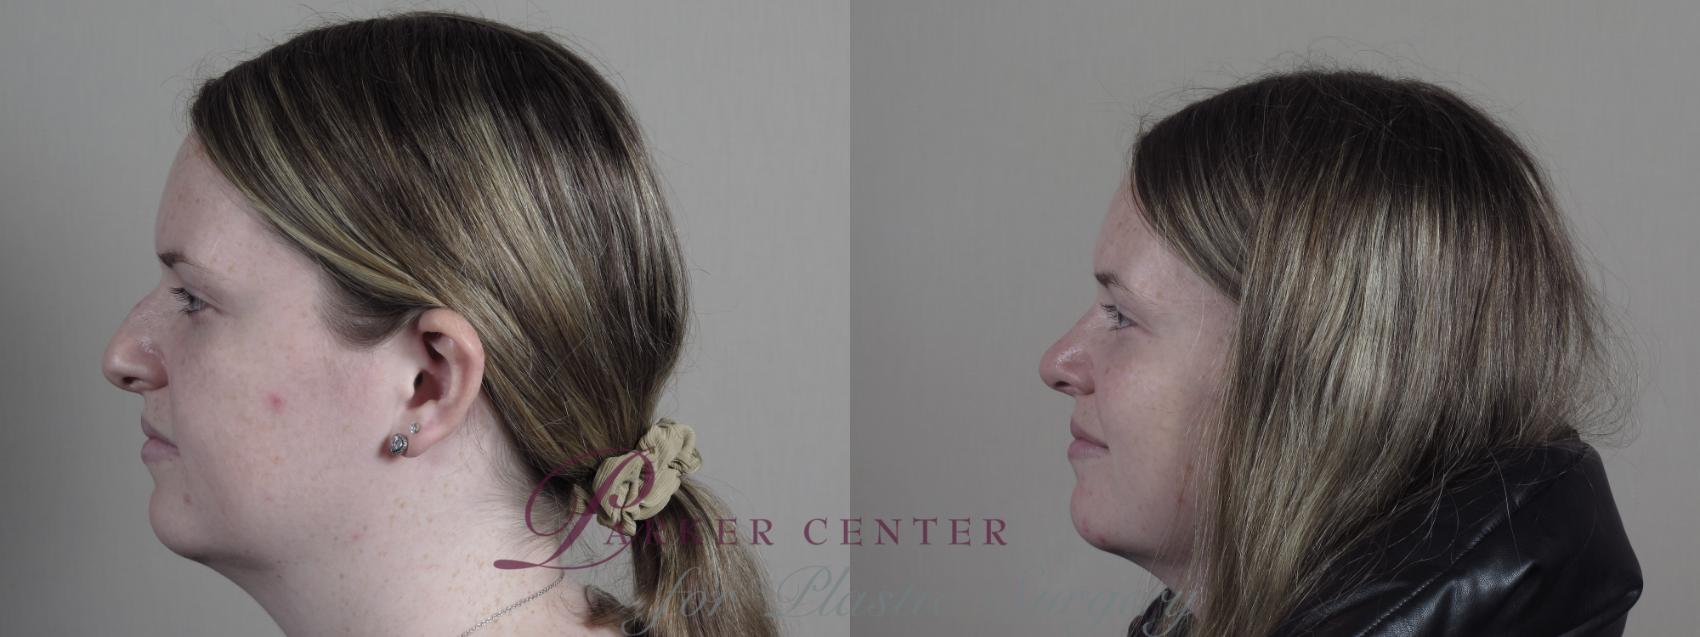 Rhinoplasty Case 1188 Before & After Left Side | Paramus, NJ | Parker Center for Plastic Surgery